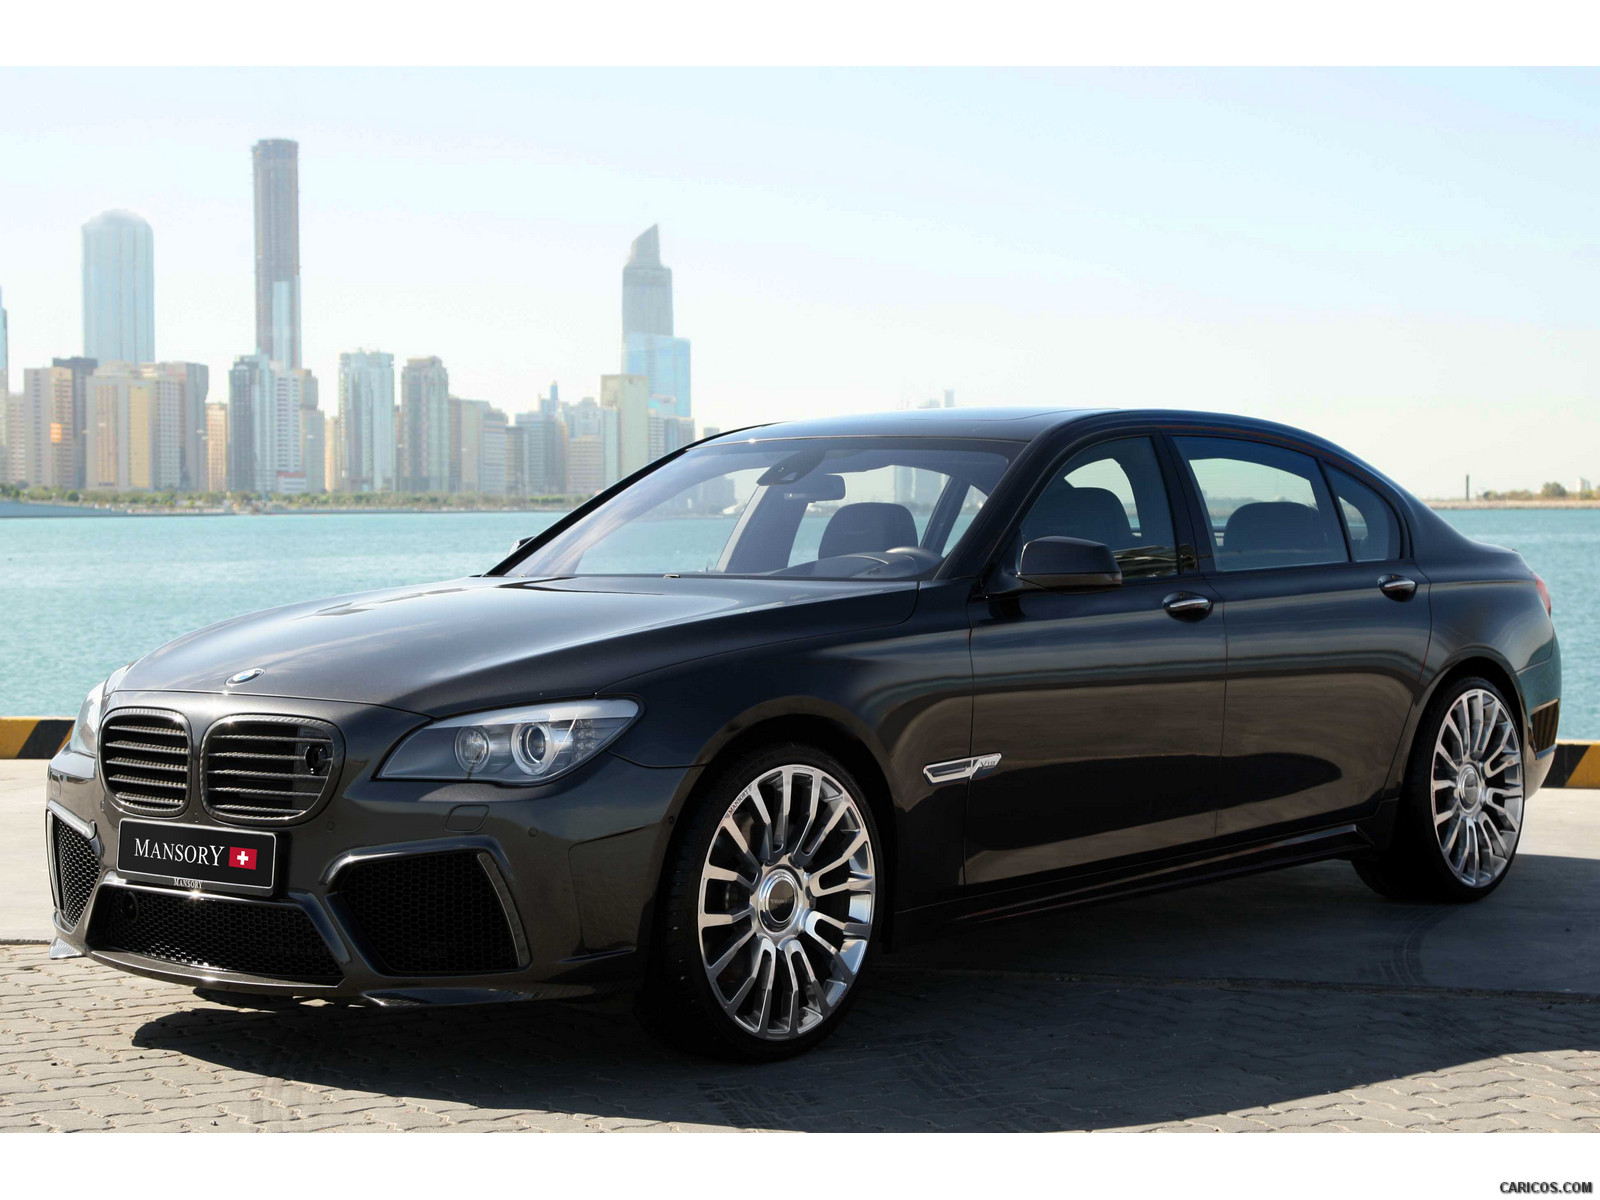 Mansory BMW 7-Series  - Front, #2 of 6